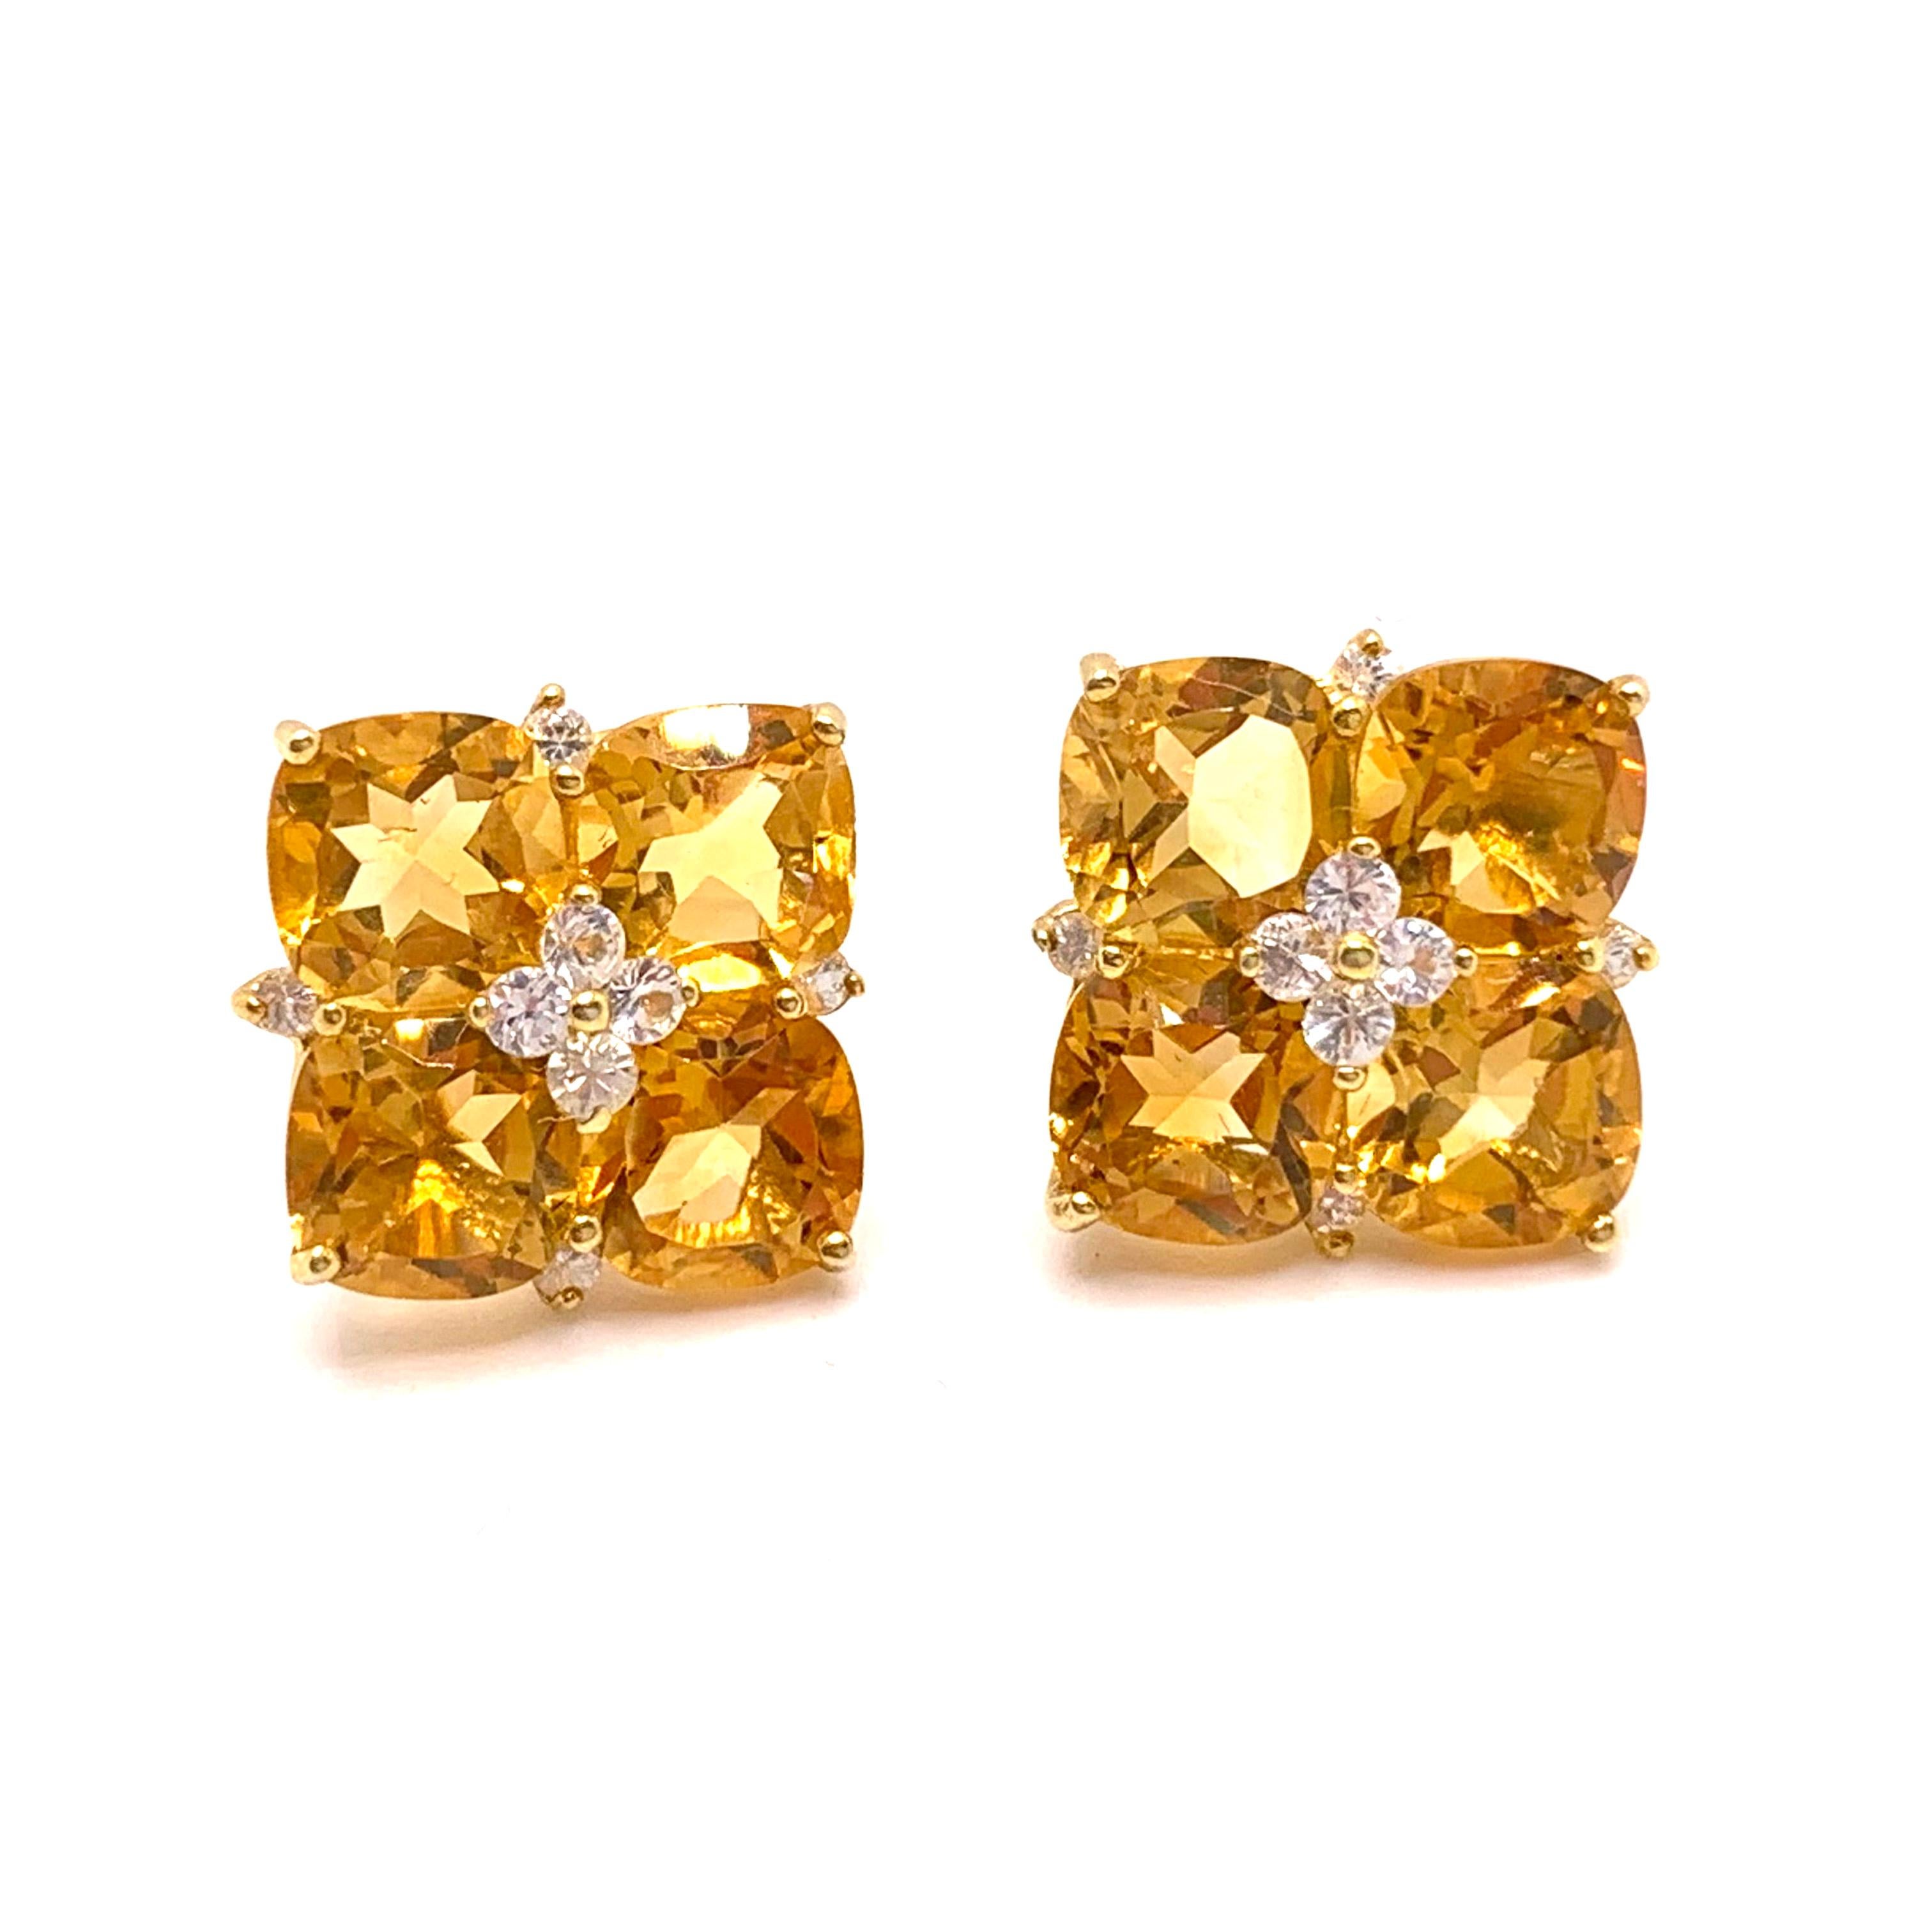 Stunning Bijoux Num Quad Cushion-cut Citrine Square Earrings

The earrings feature flawless  cushion-cut Brazilian citrine, adorned with small round white sapphire, handset in 18k yellow gold vermeil over sterling silver. Straight post with large